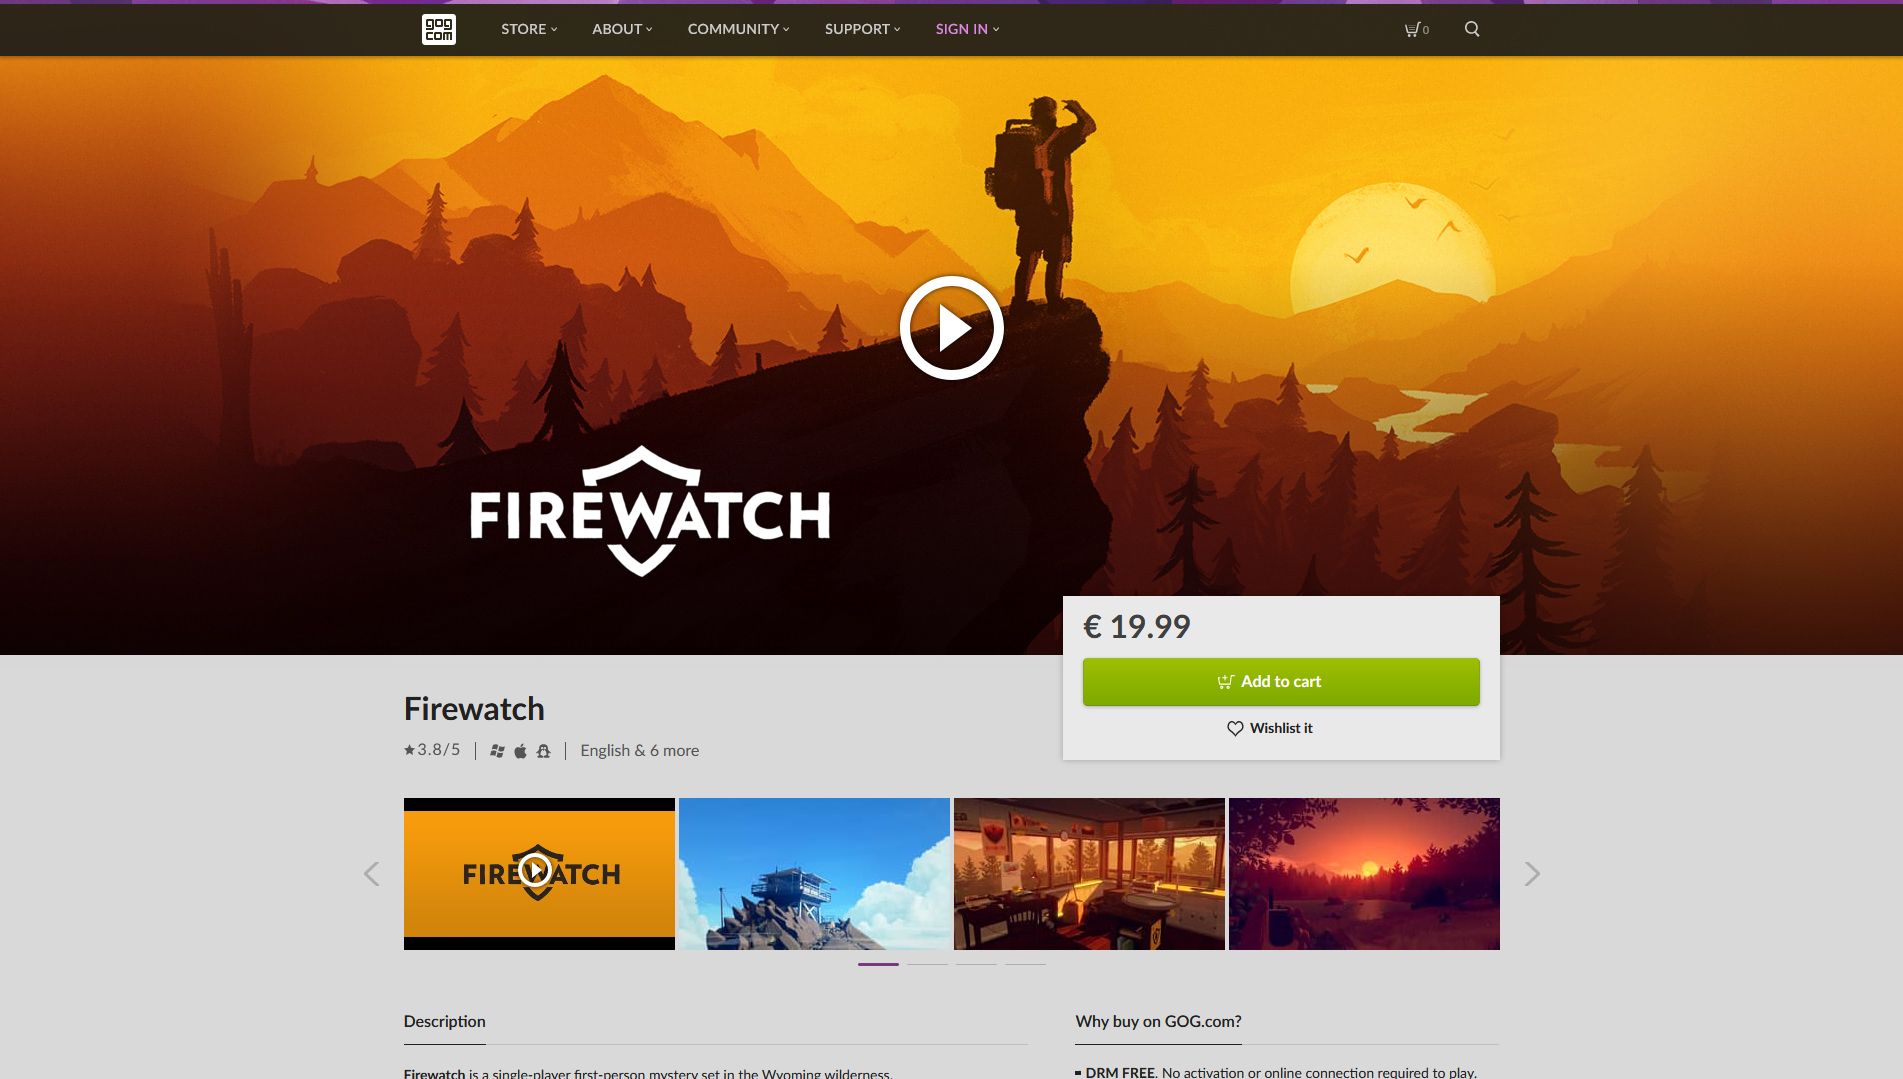 9 Steam Alternatives - Sites Like Steam To Buy PC Games Online - HubPages